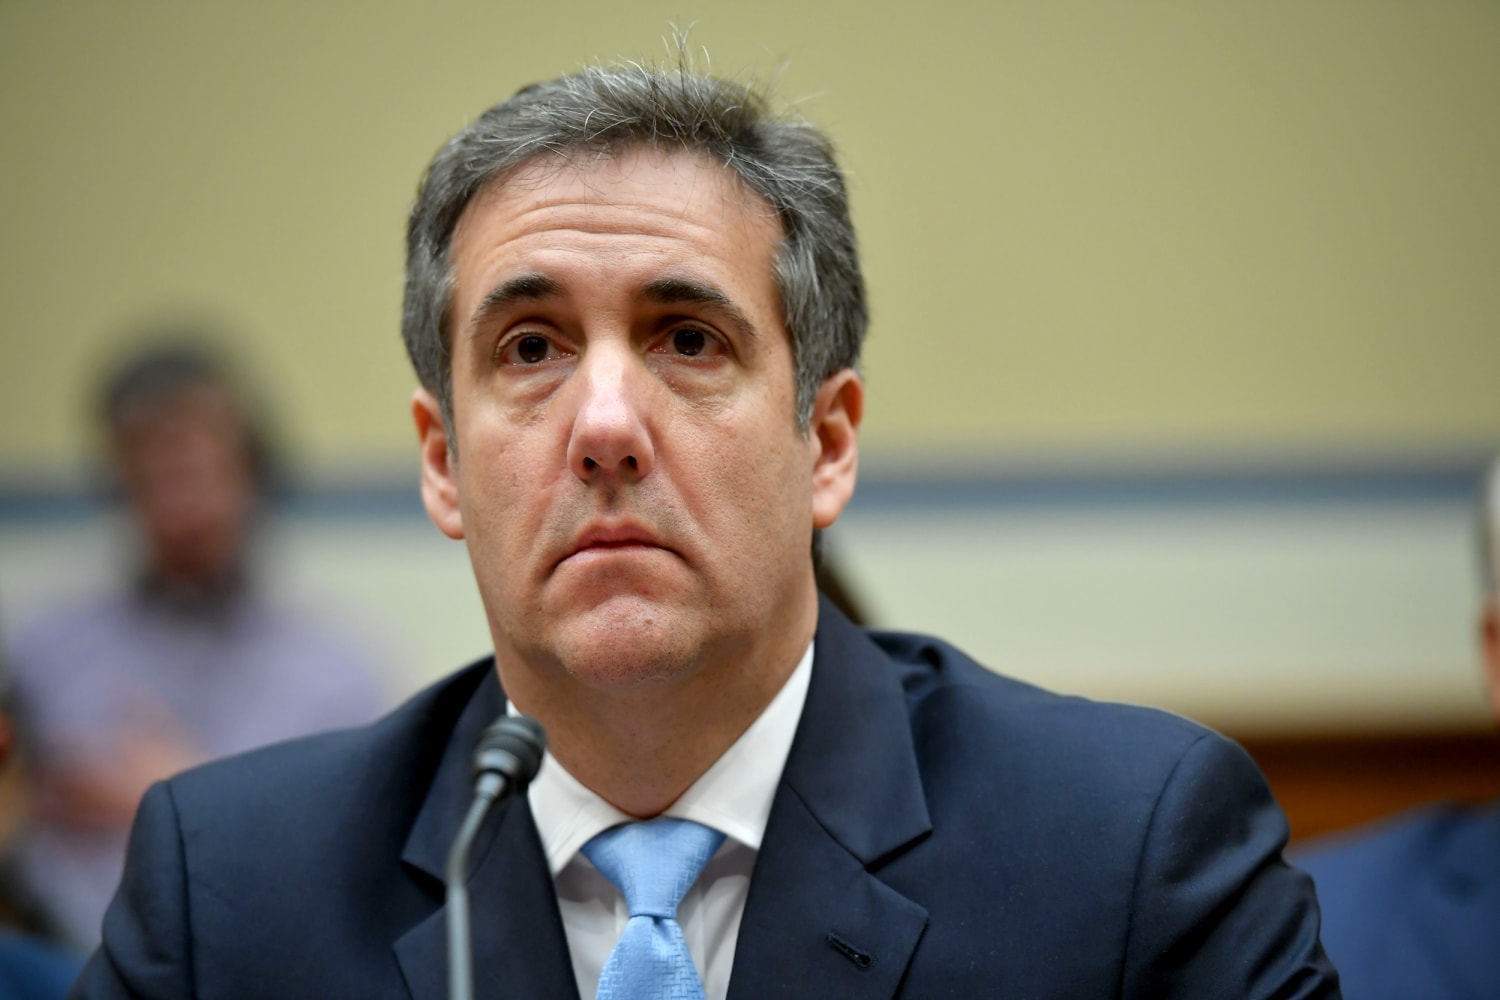 Michael Cohen made  million criticizing Trump and aims to run for Congress